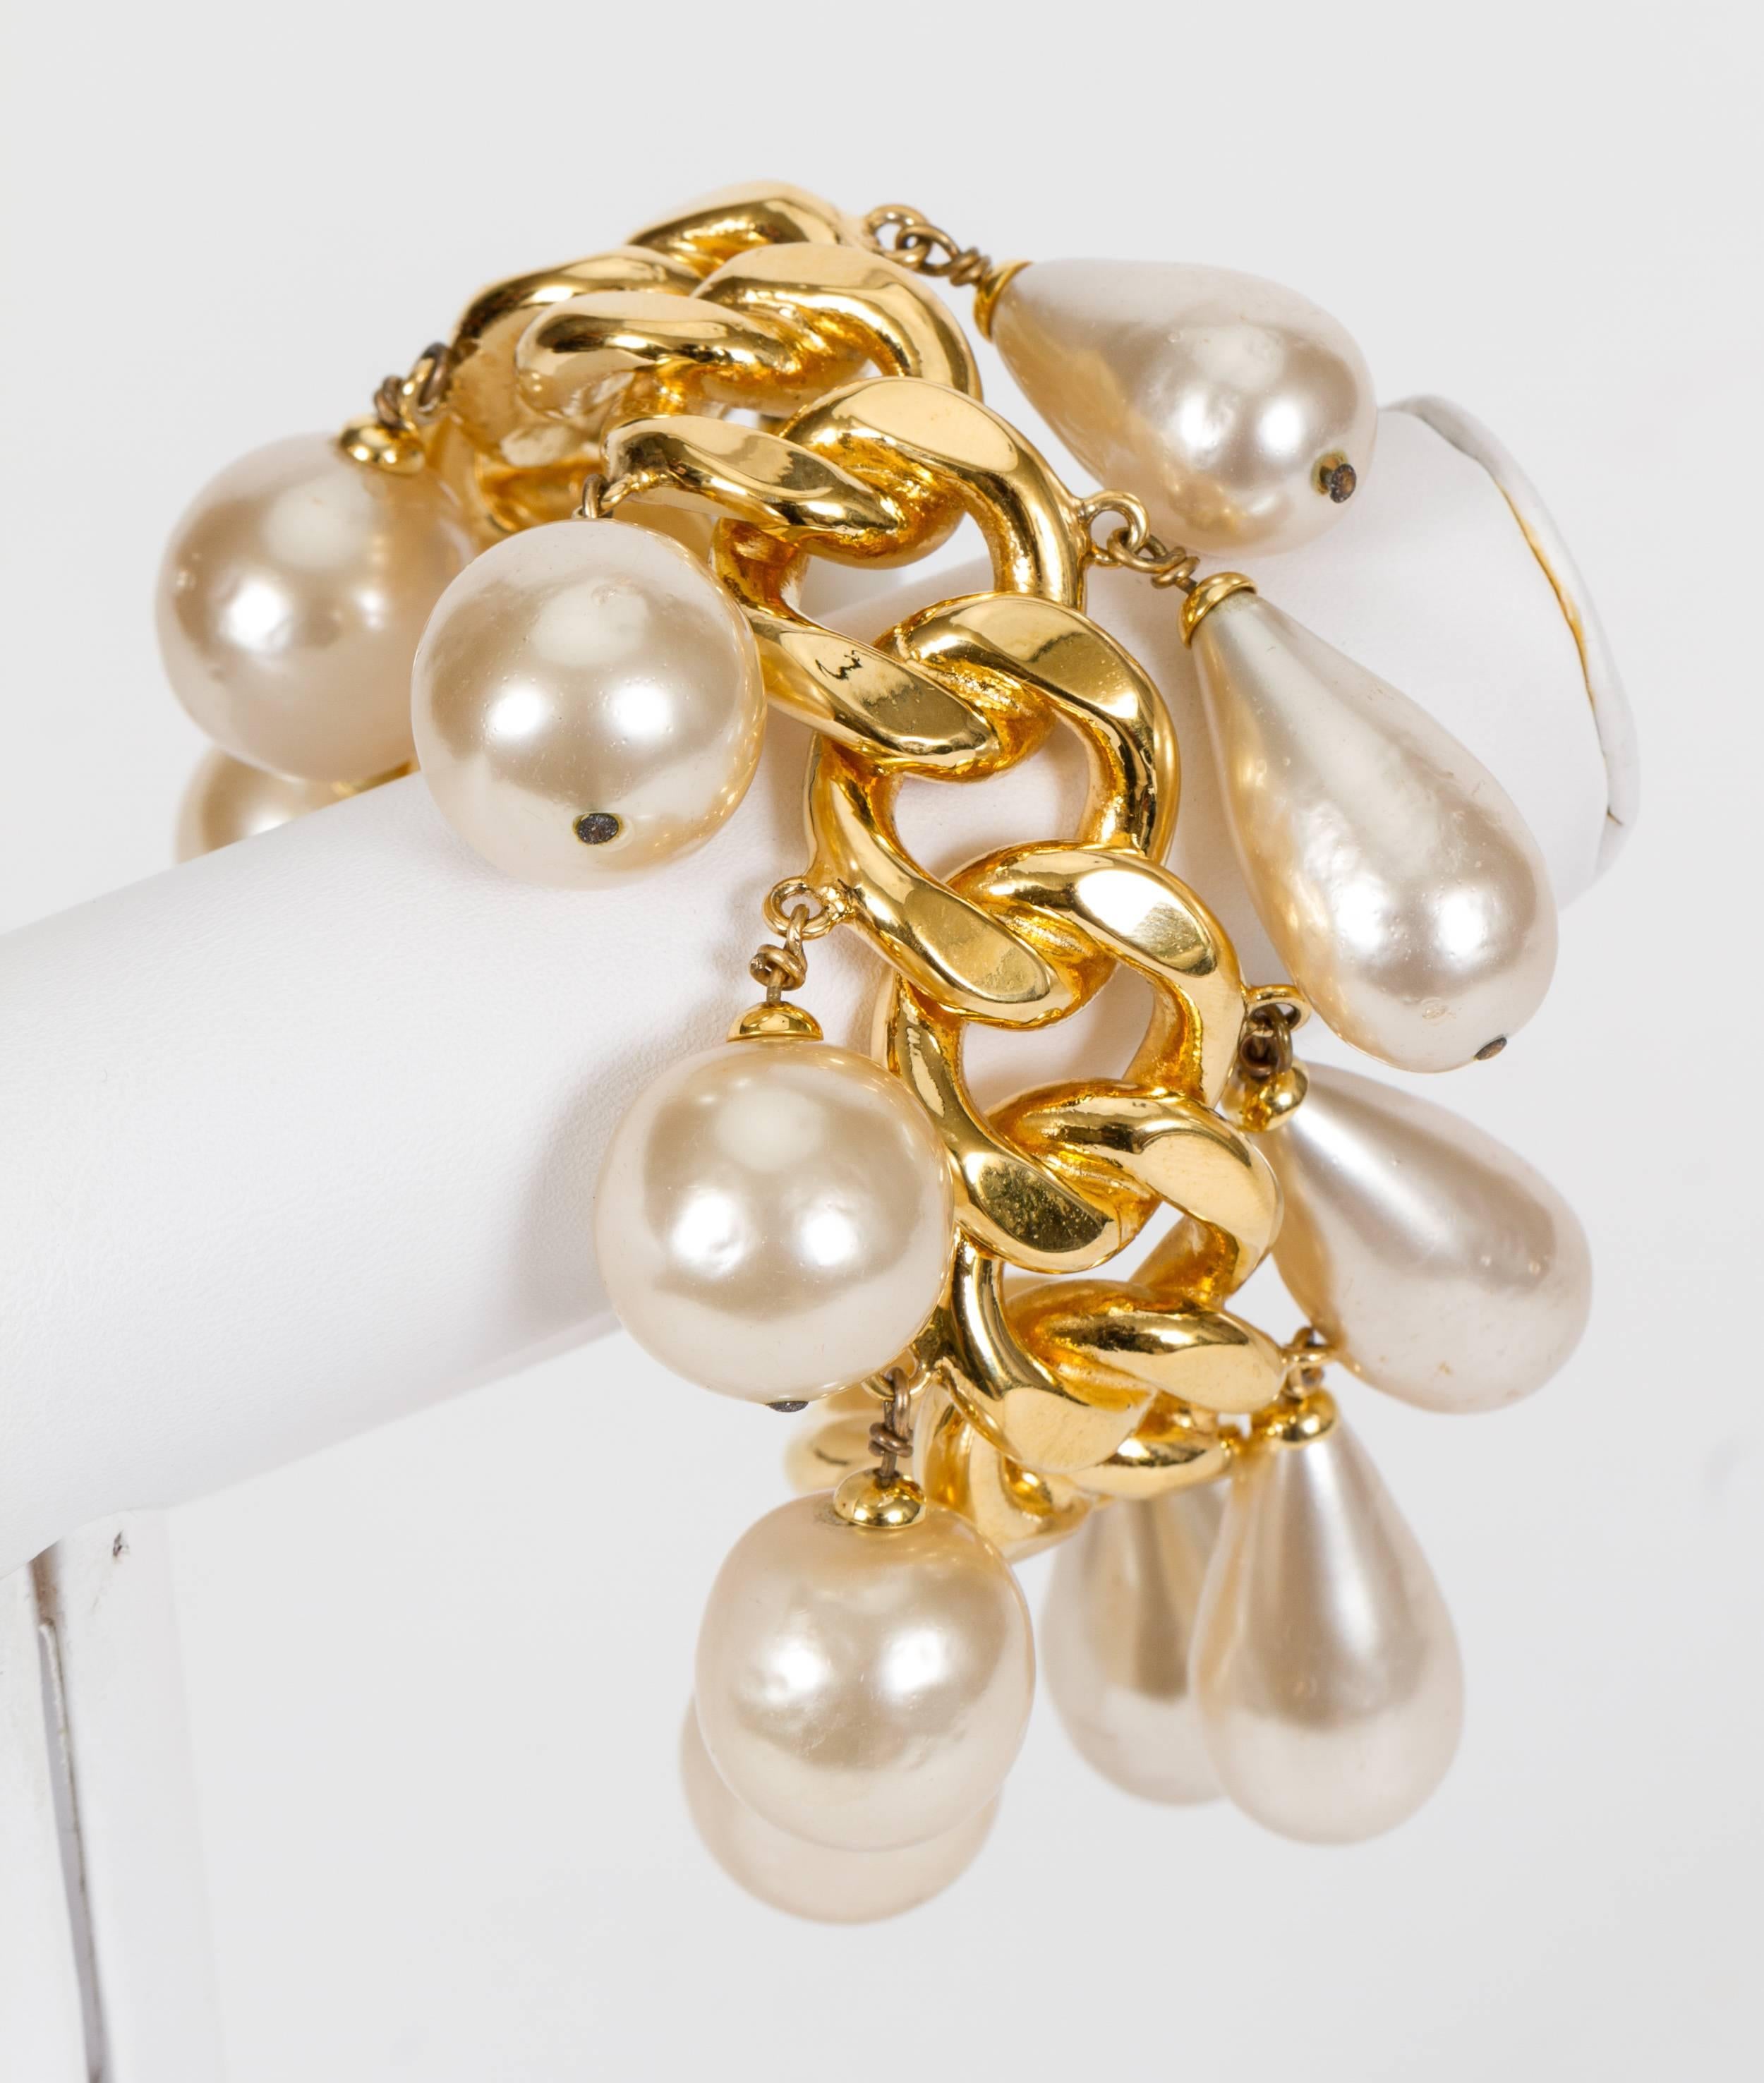 Chanel runway chain cuff with pearl dangles. Collection 23 by Victoire de Castellaine. Opening, 1.5